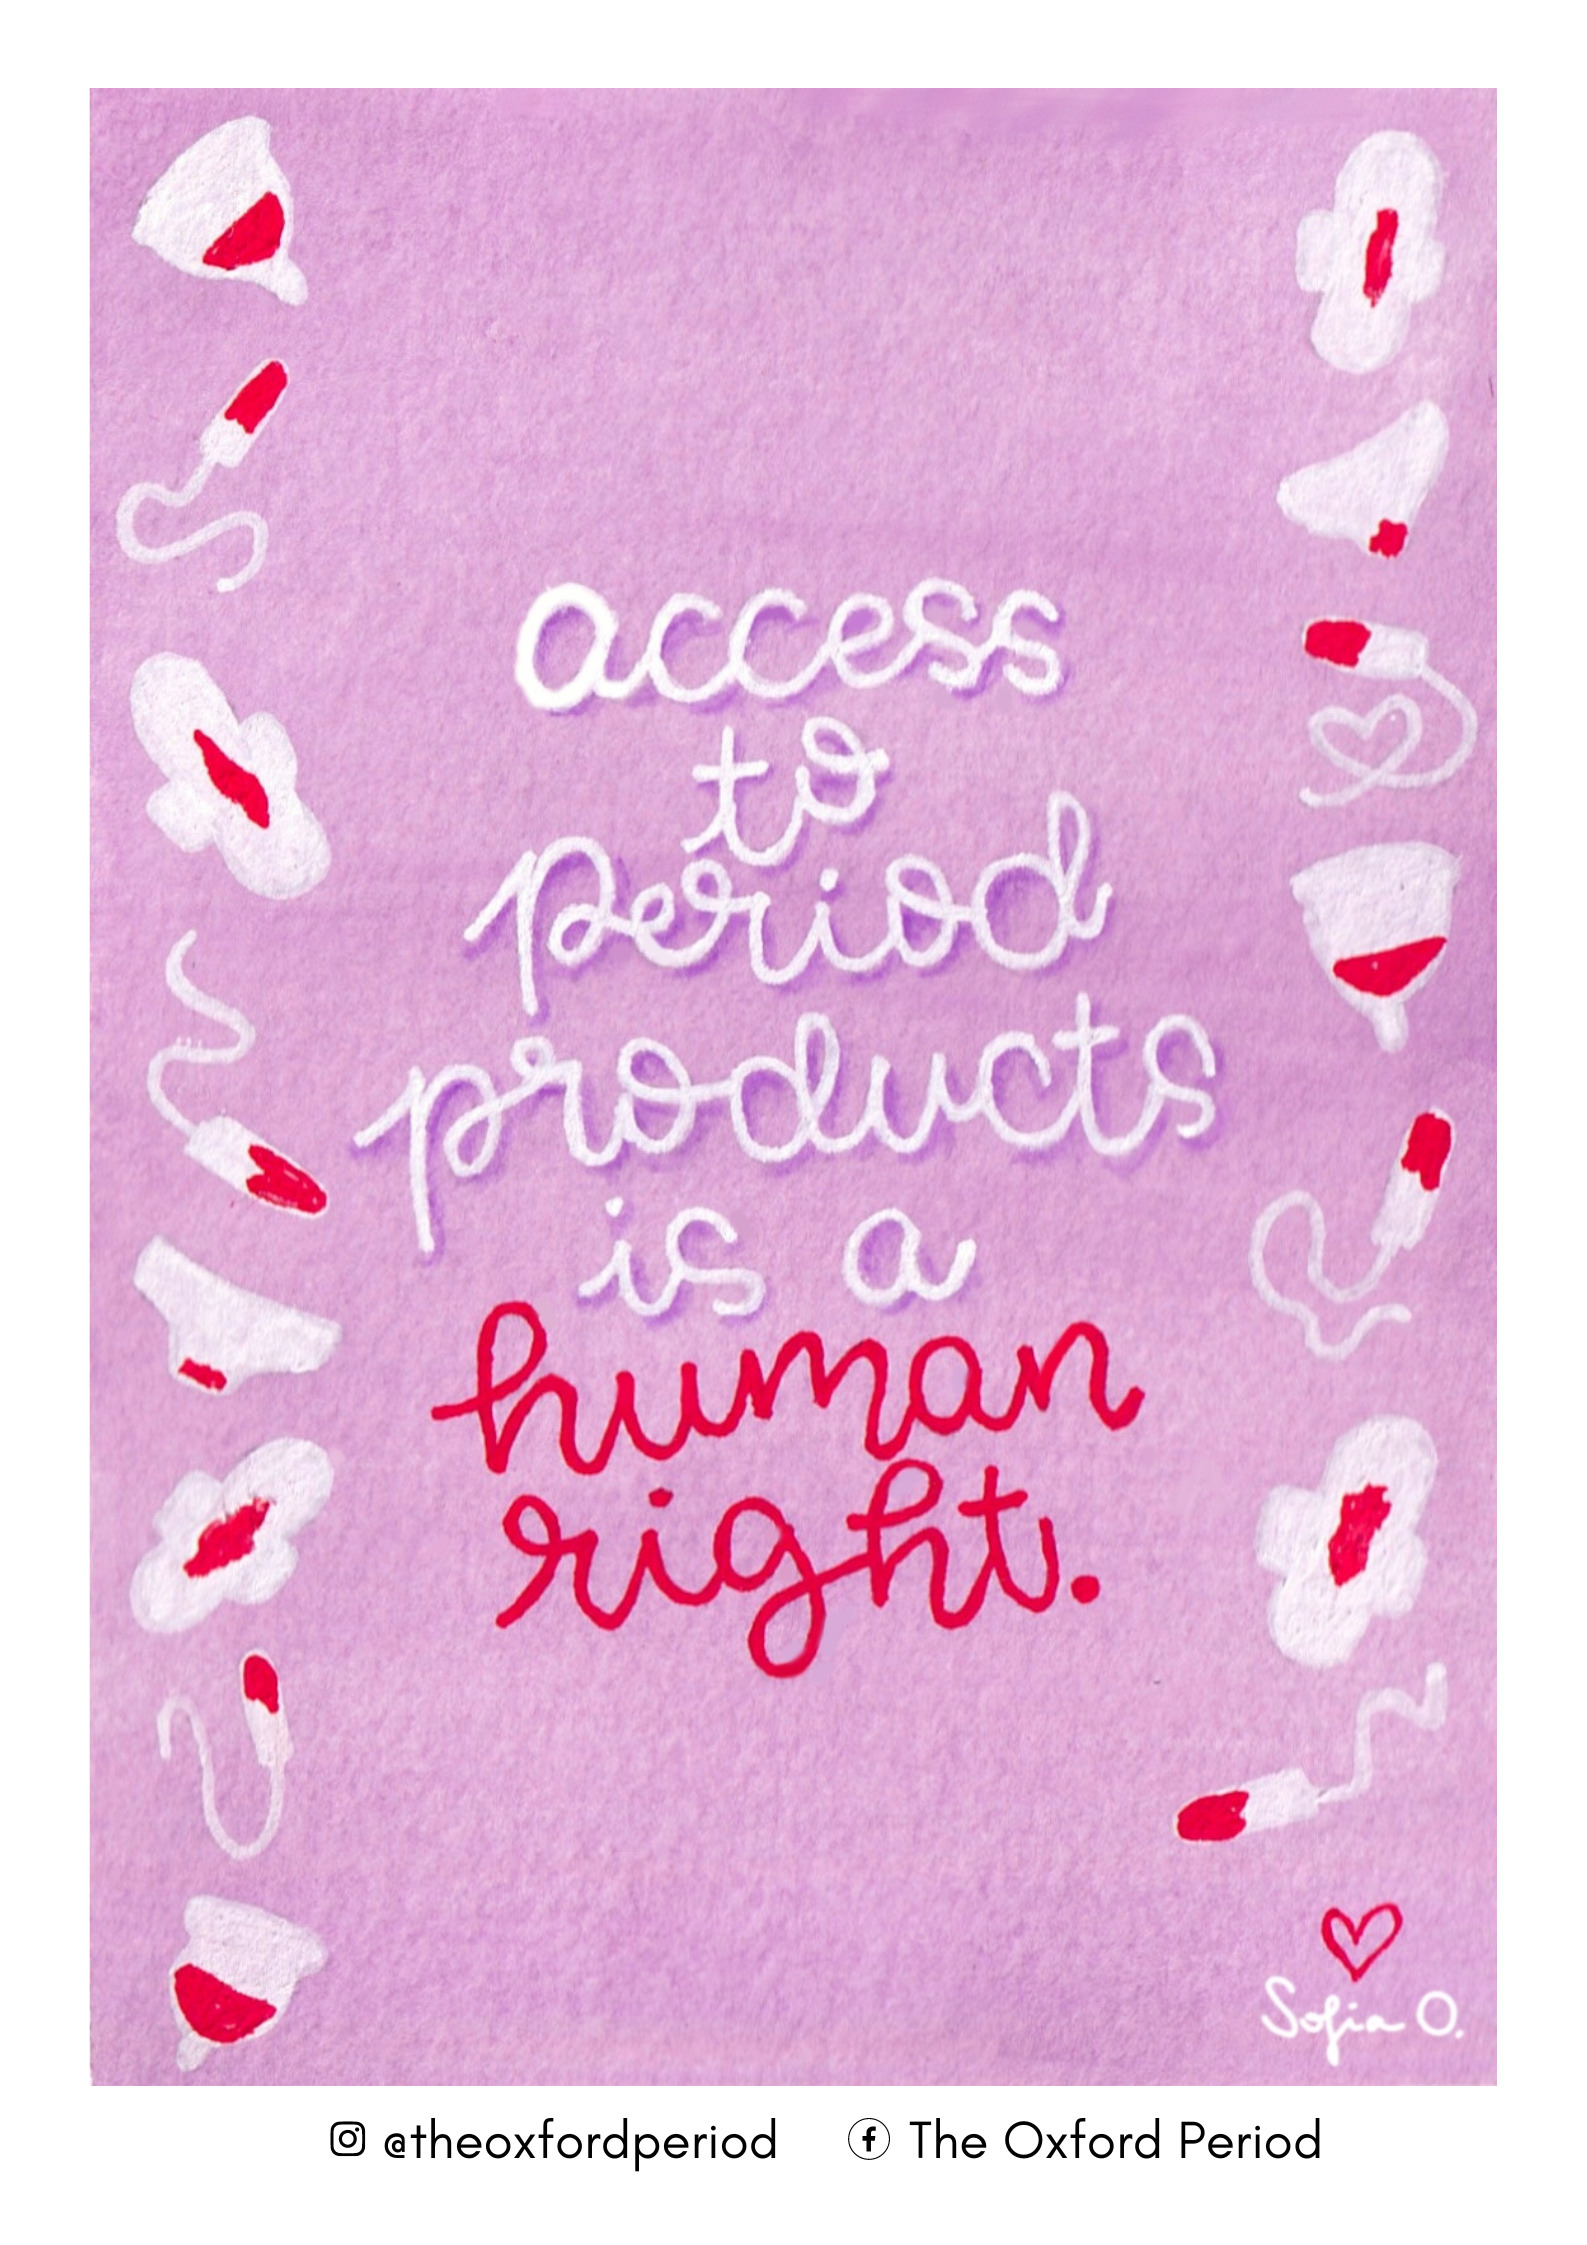 Text: access to period products is a human right